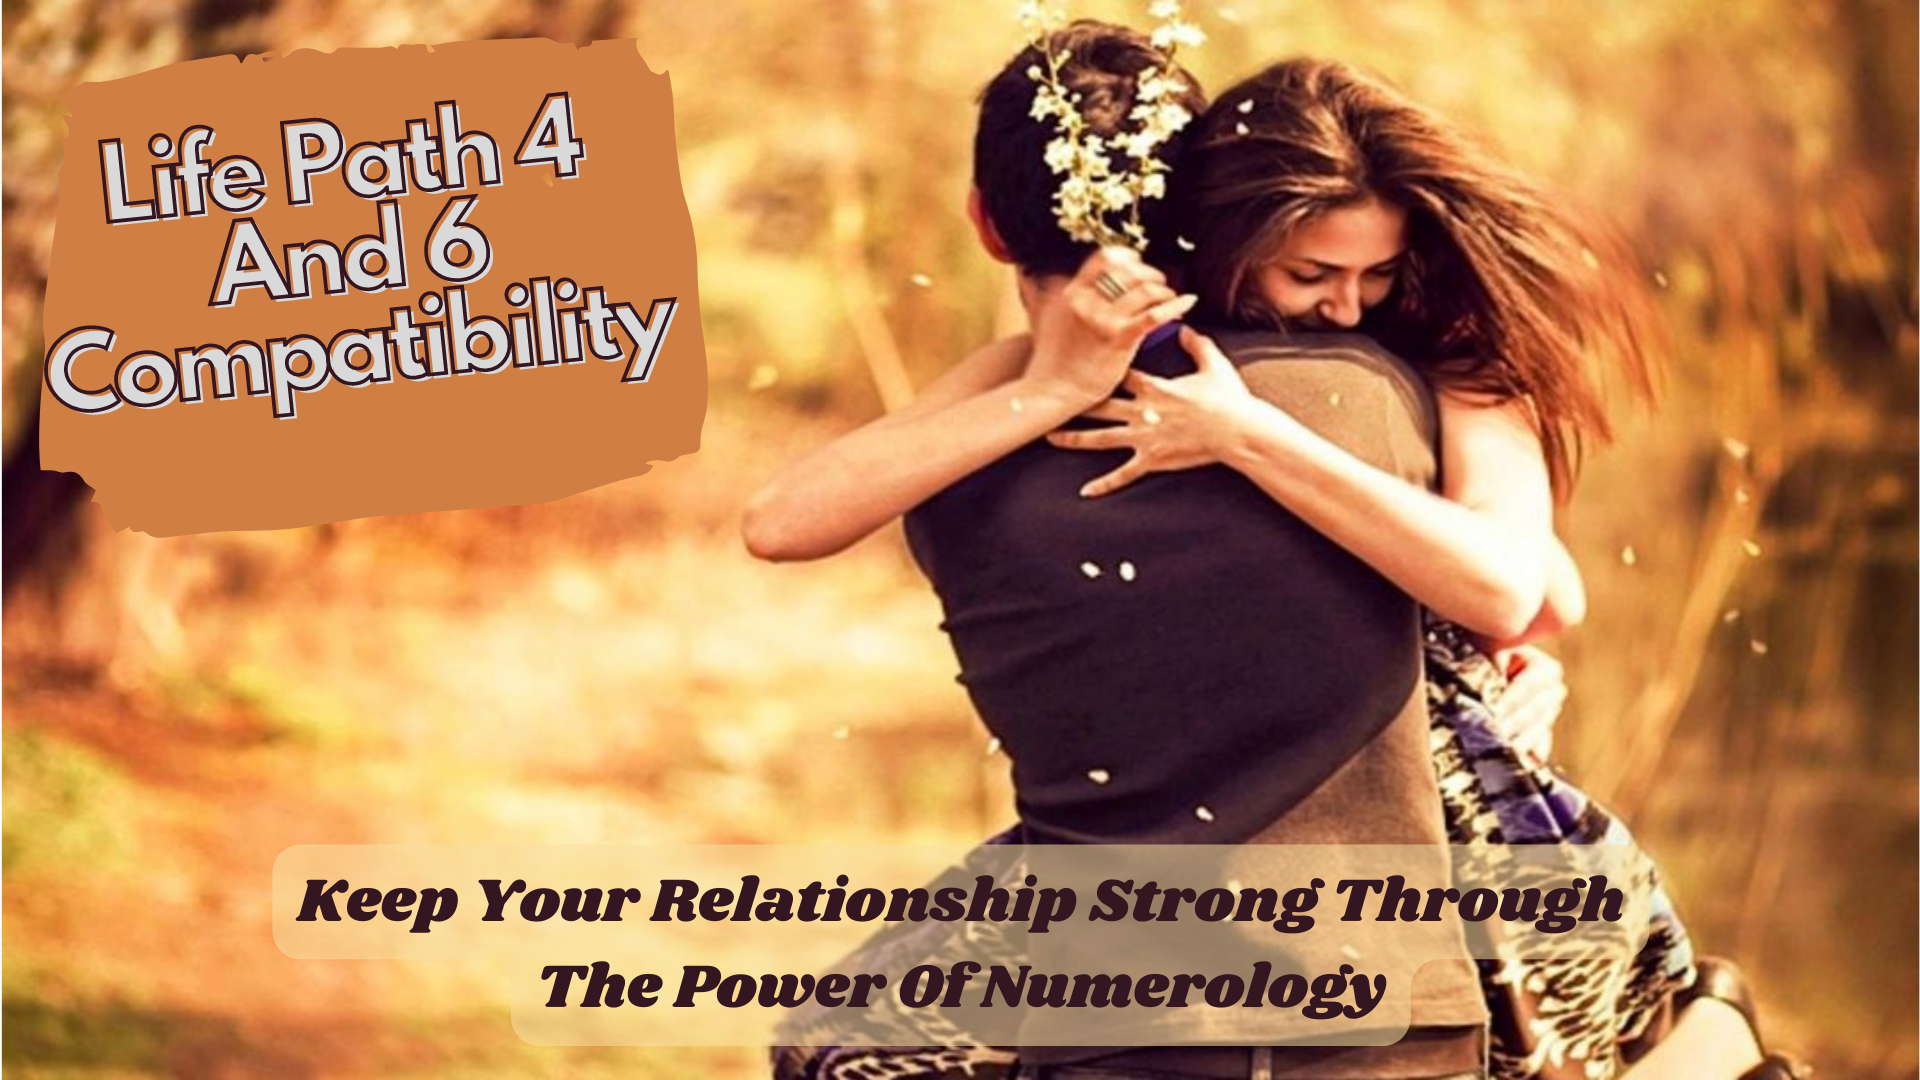 Life Path 4 And 6 Compatibility -  Keep Your Relationship Strong Through The Power Of Numerology